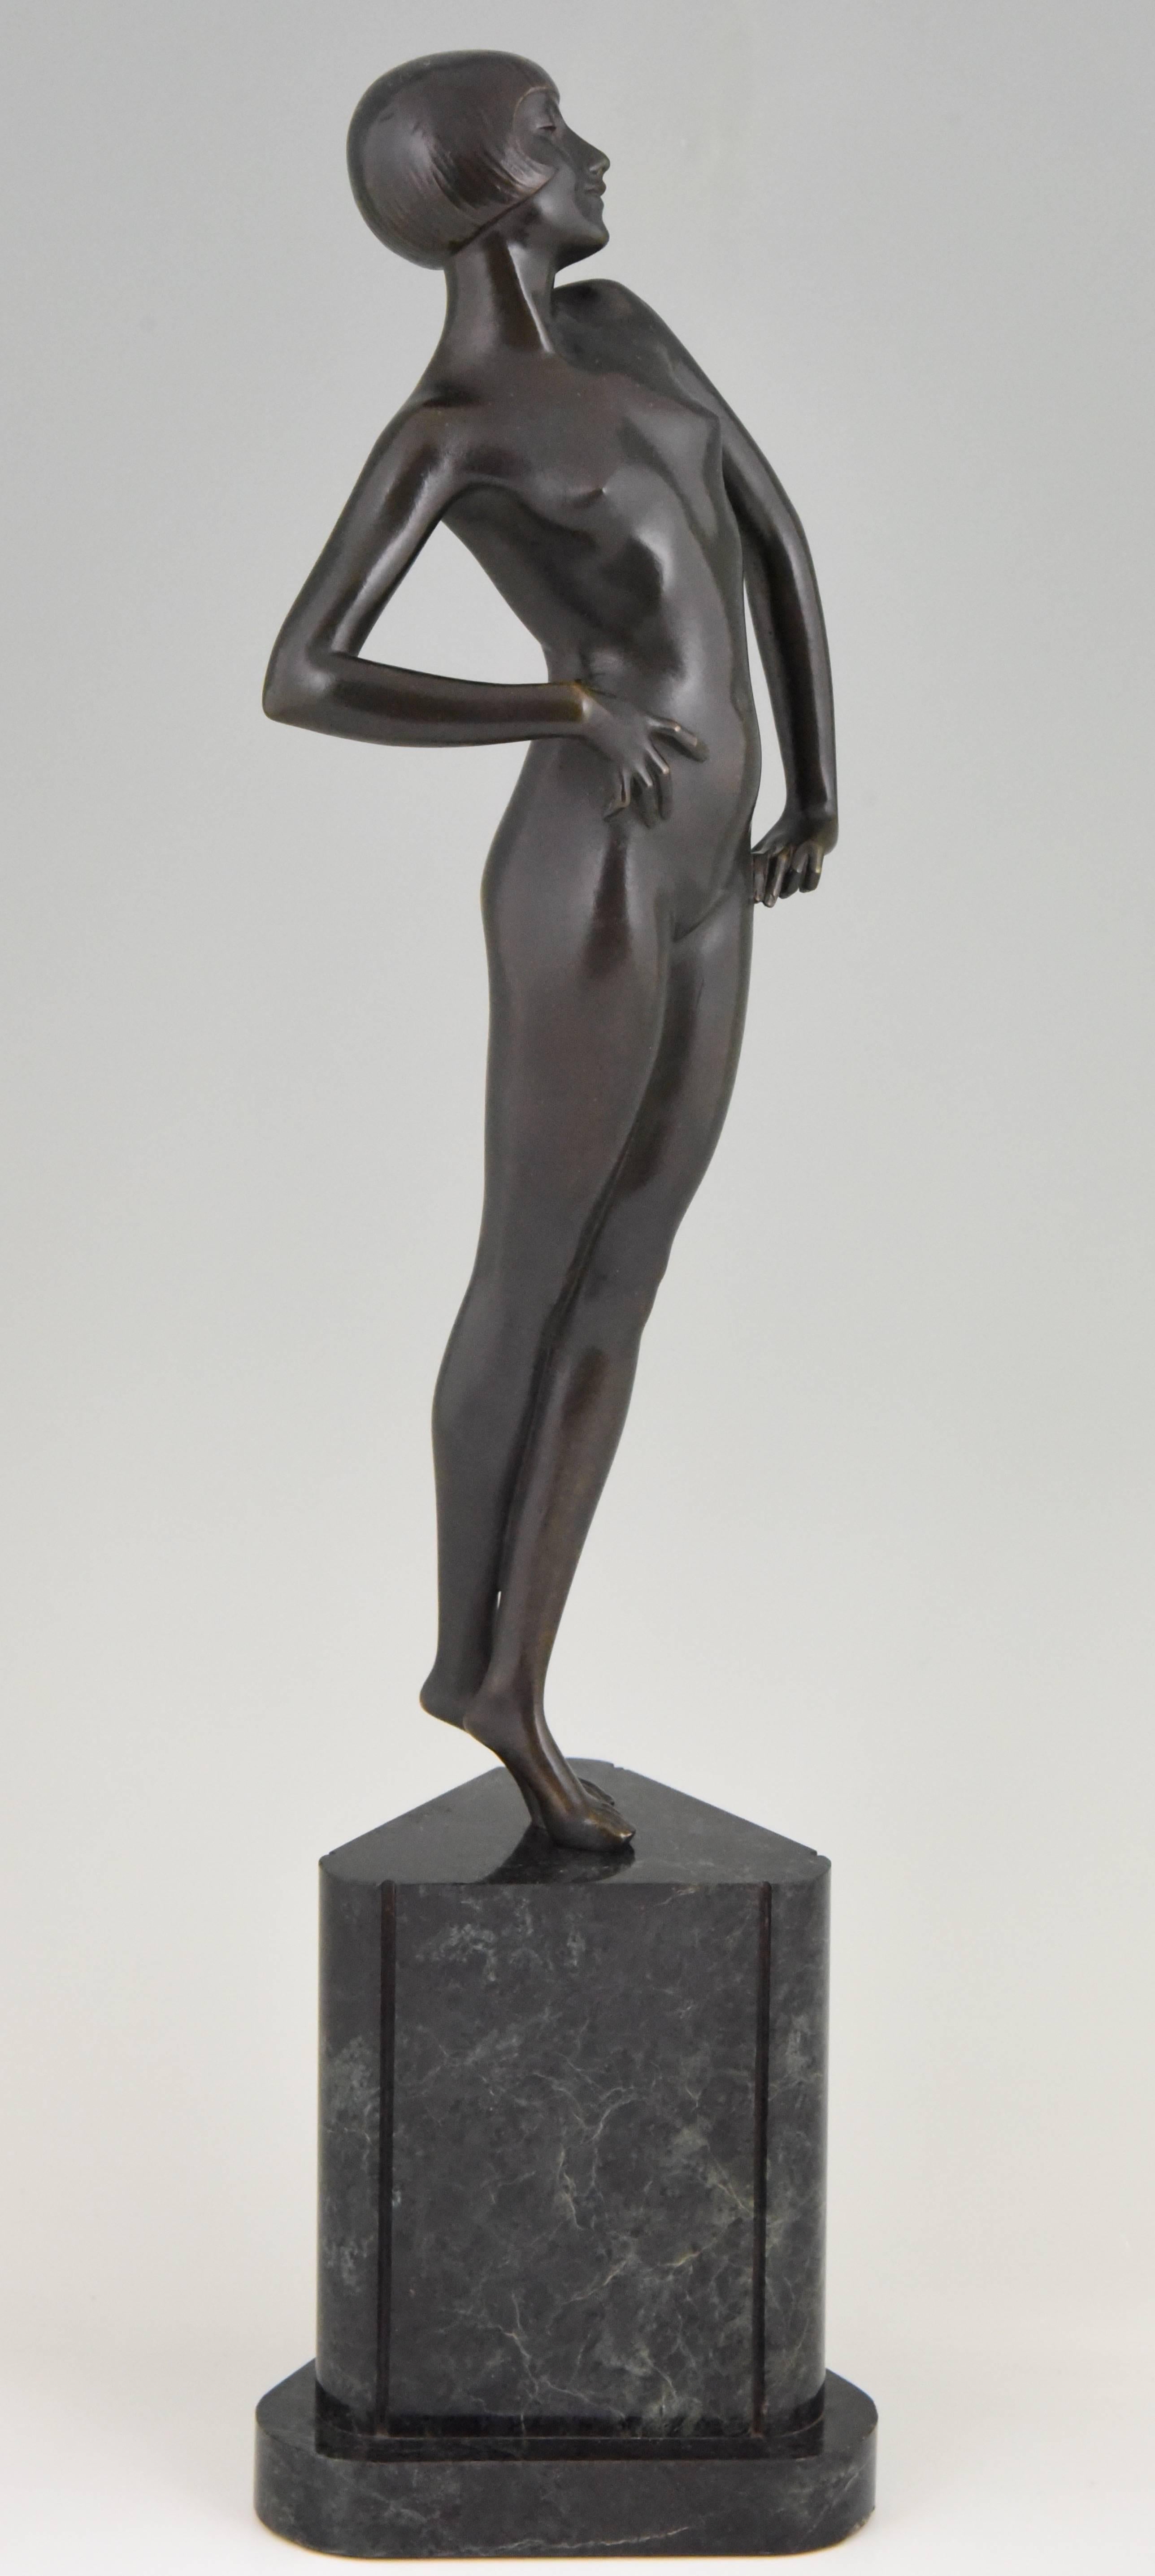 French Art Deco Bronze Sculpture Standing Nude Pride by Philippe Devriez, France, 1925